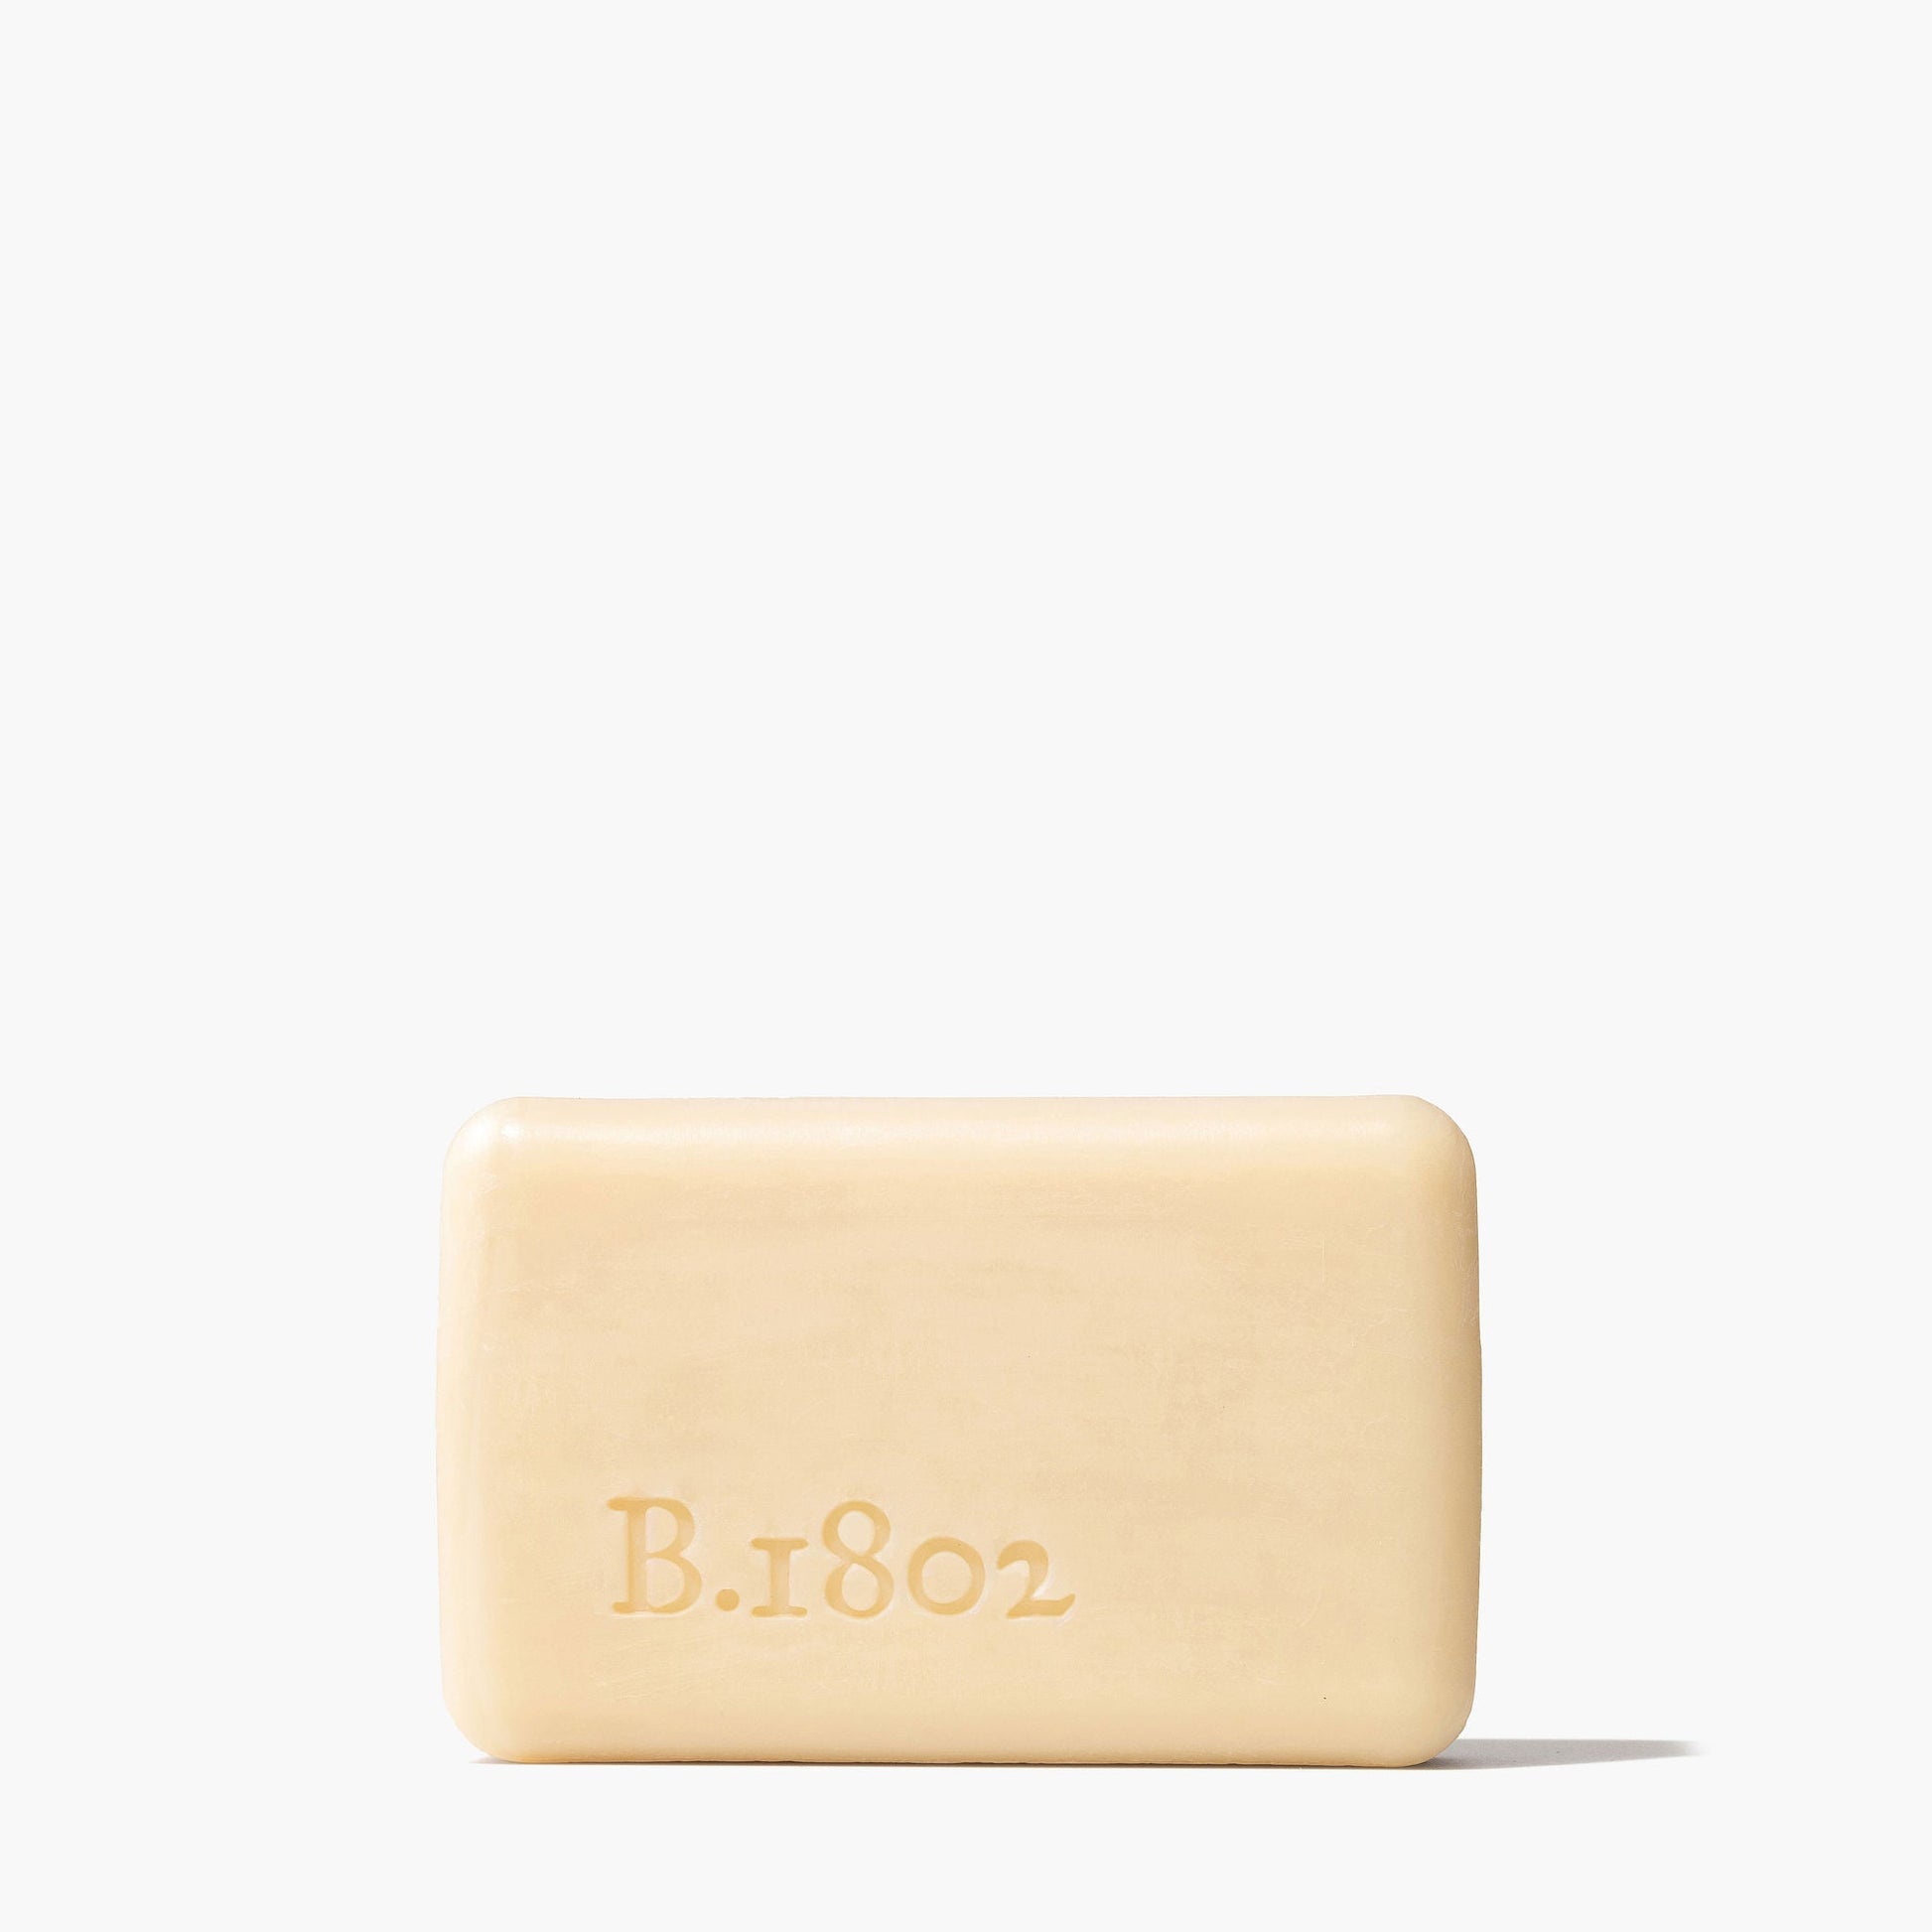 unwrapped bar of lilac dream soap stamped with "B.1802" logo.